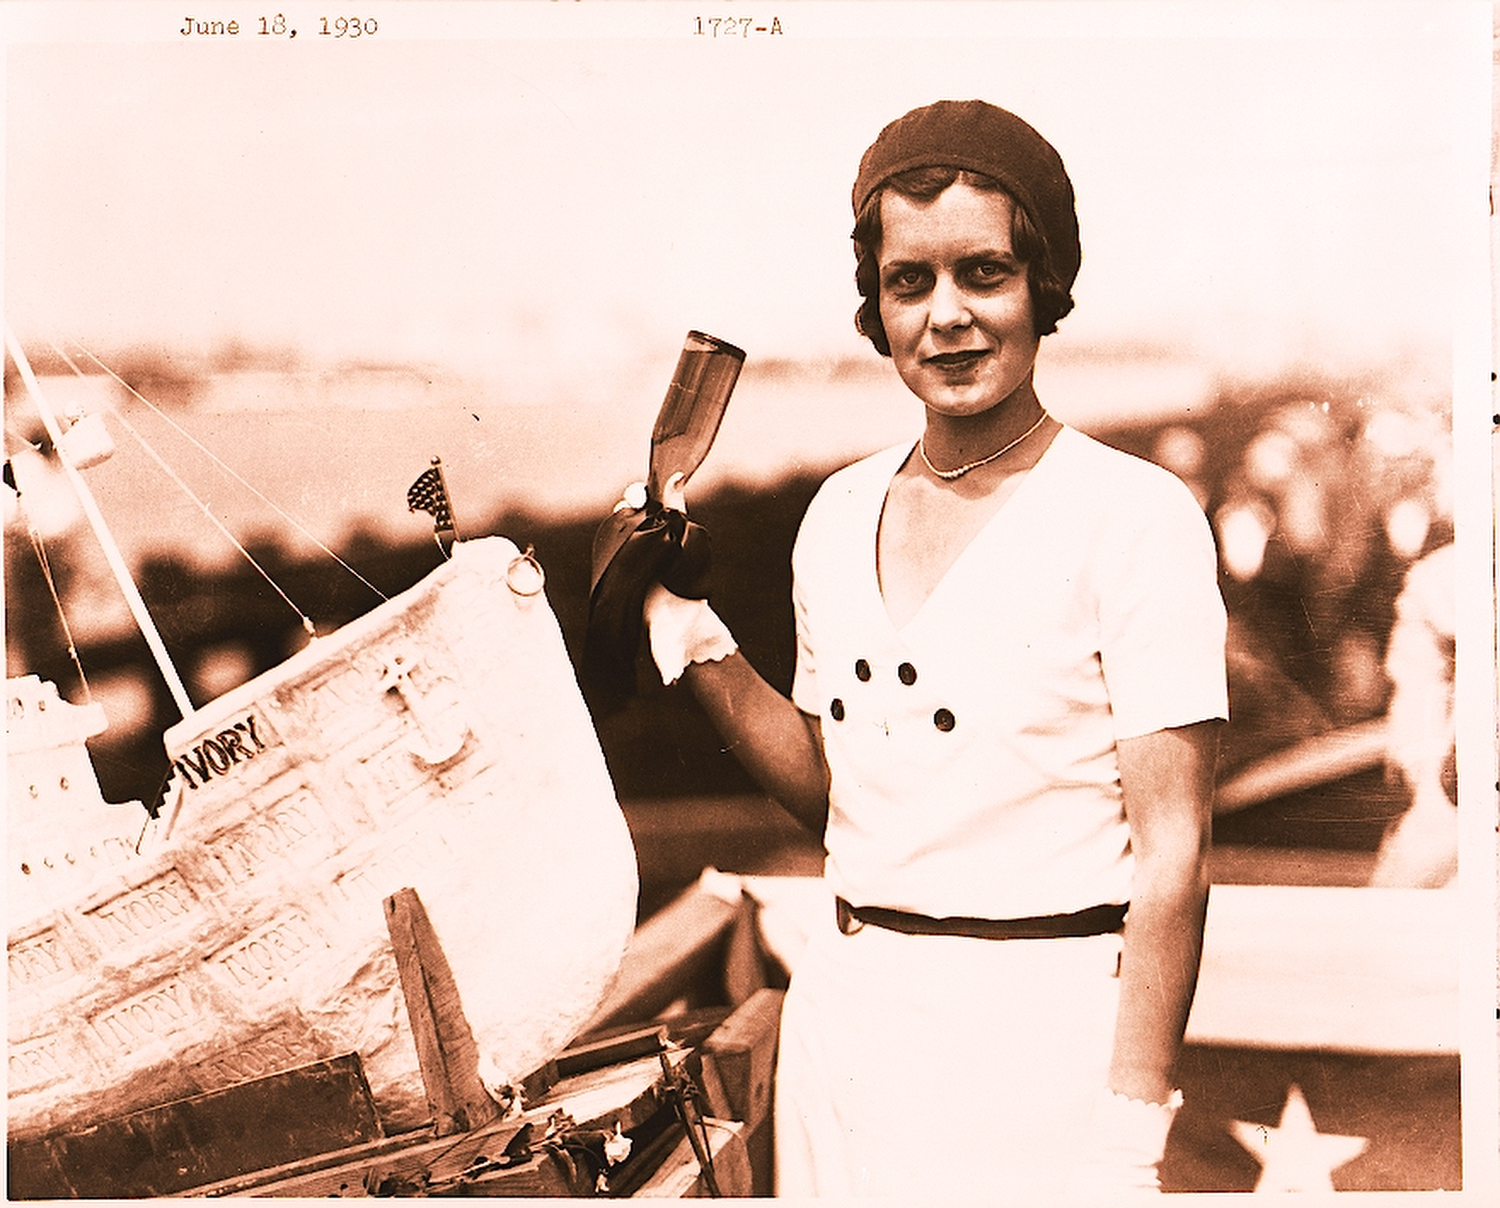 Harriet Hauge, daughter of Long Beach Mayor Oscar Hauge, prepares to christen one of the more unusual vessels to be launched at the port. The 4-foot-long boat made of Ivory Soap commemorated the 1930 opening of the Procter & Gamble plant